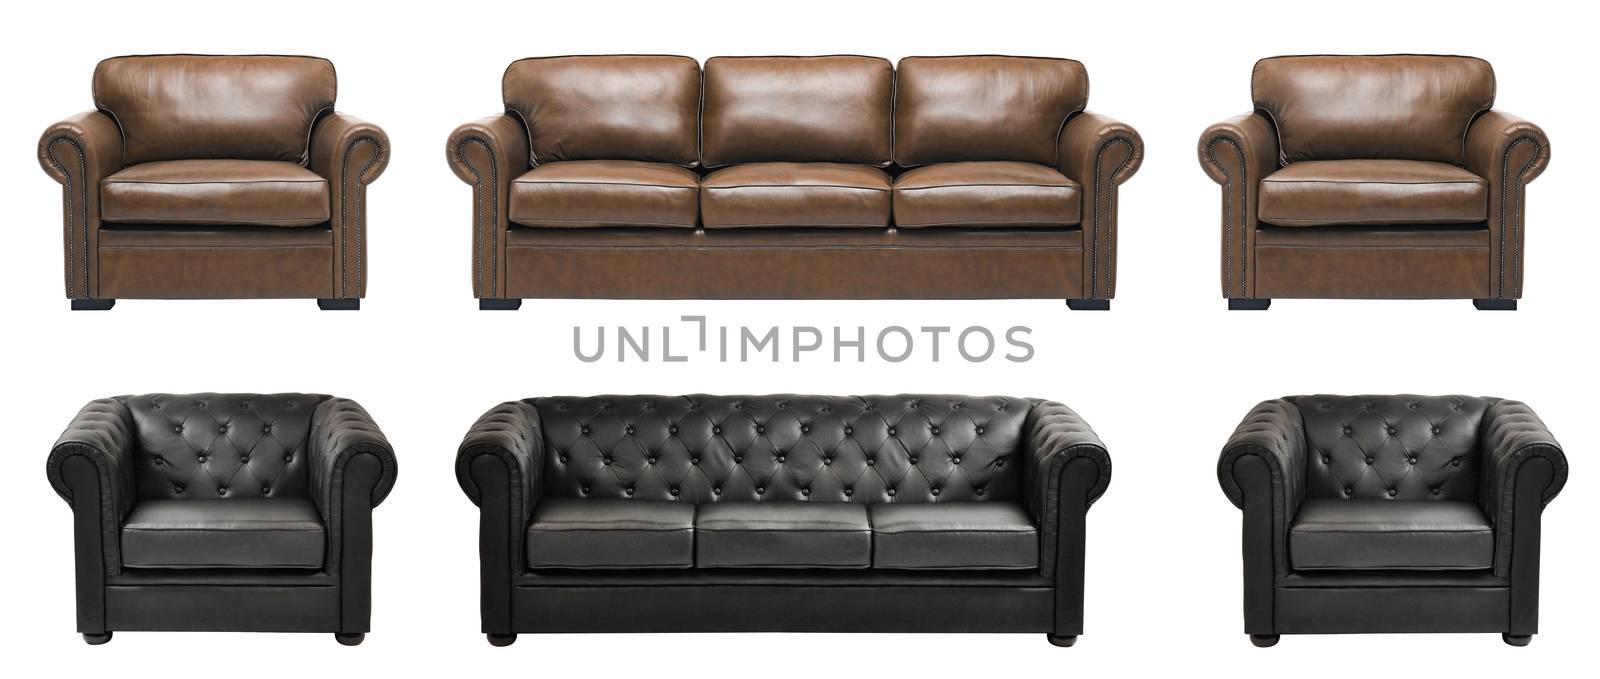 Nice and luxury leather sofa with armchairs